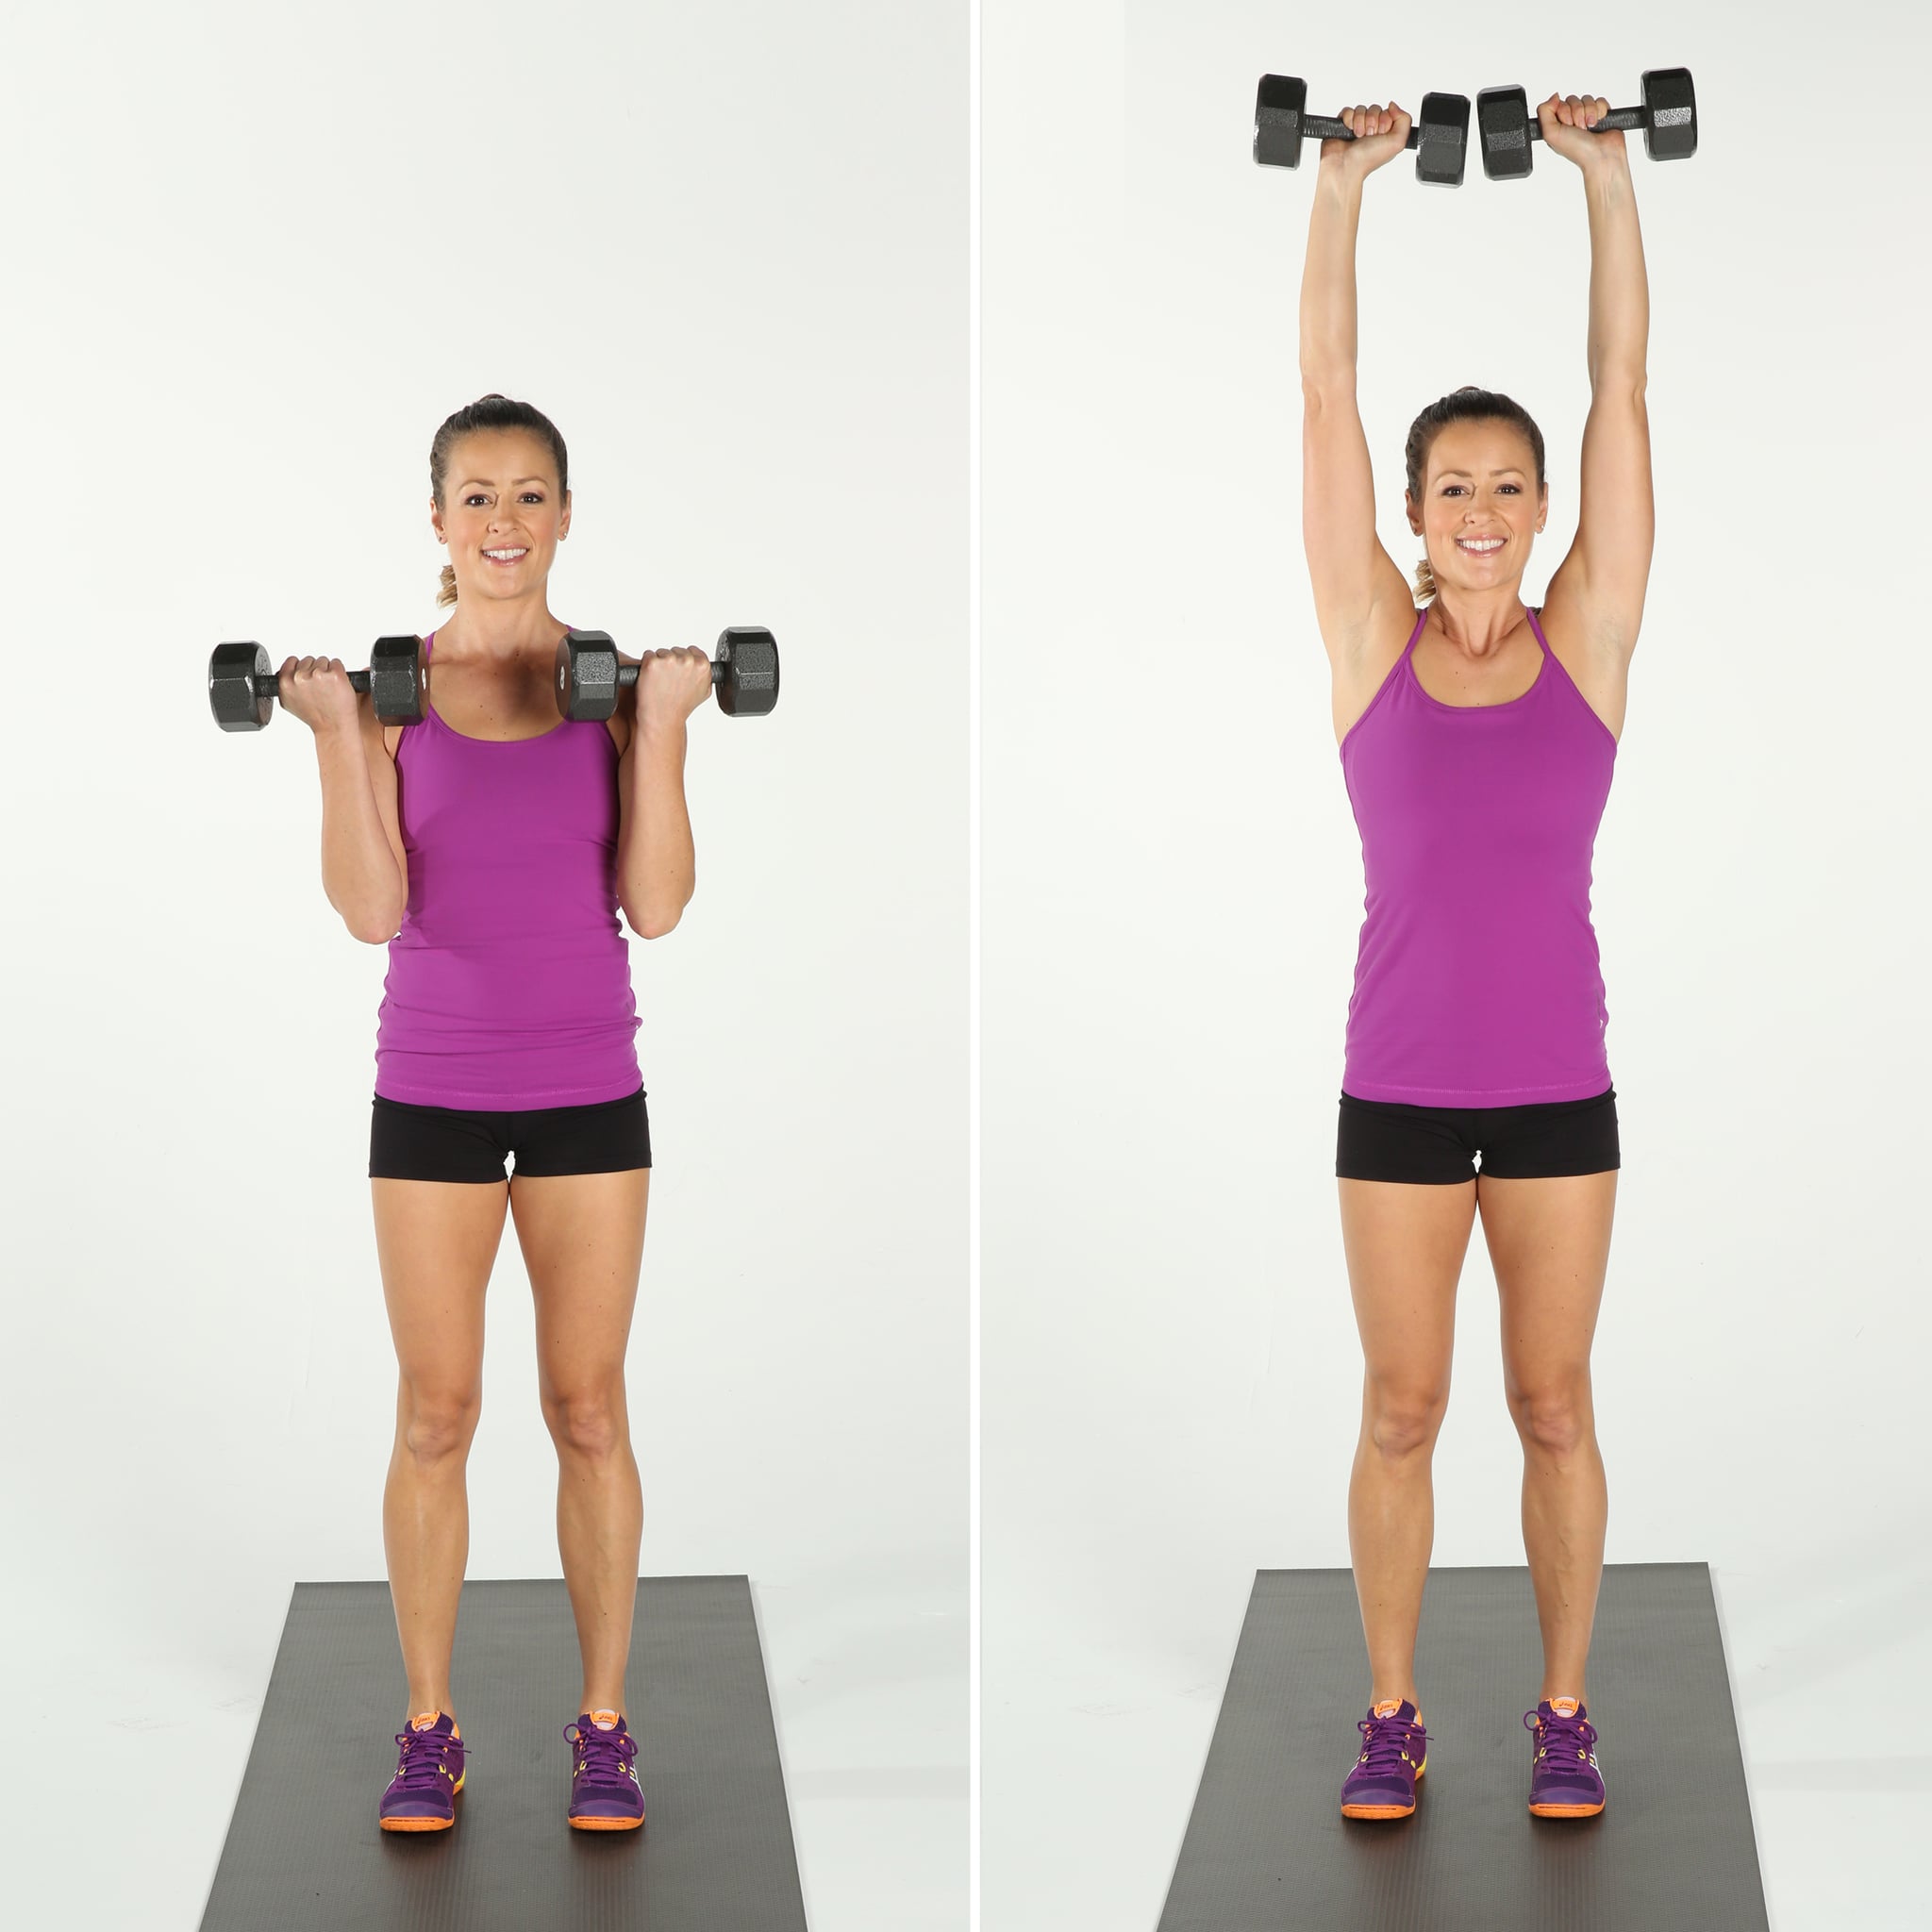 Dumbbell Arm Exercises: Bicep Curl to Overhead Press | The 11 Dumbbell Arm  Exercises Trainers Swear By | POPSUGAR Fitness Photo 3